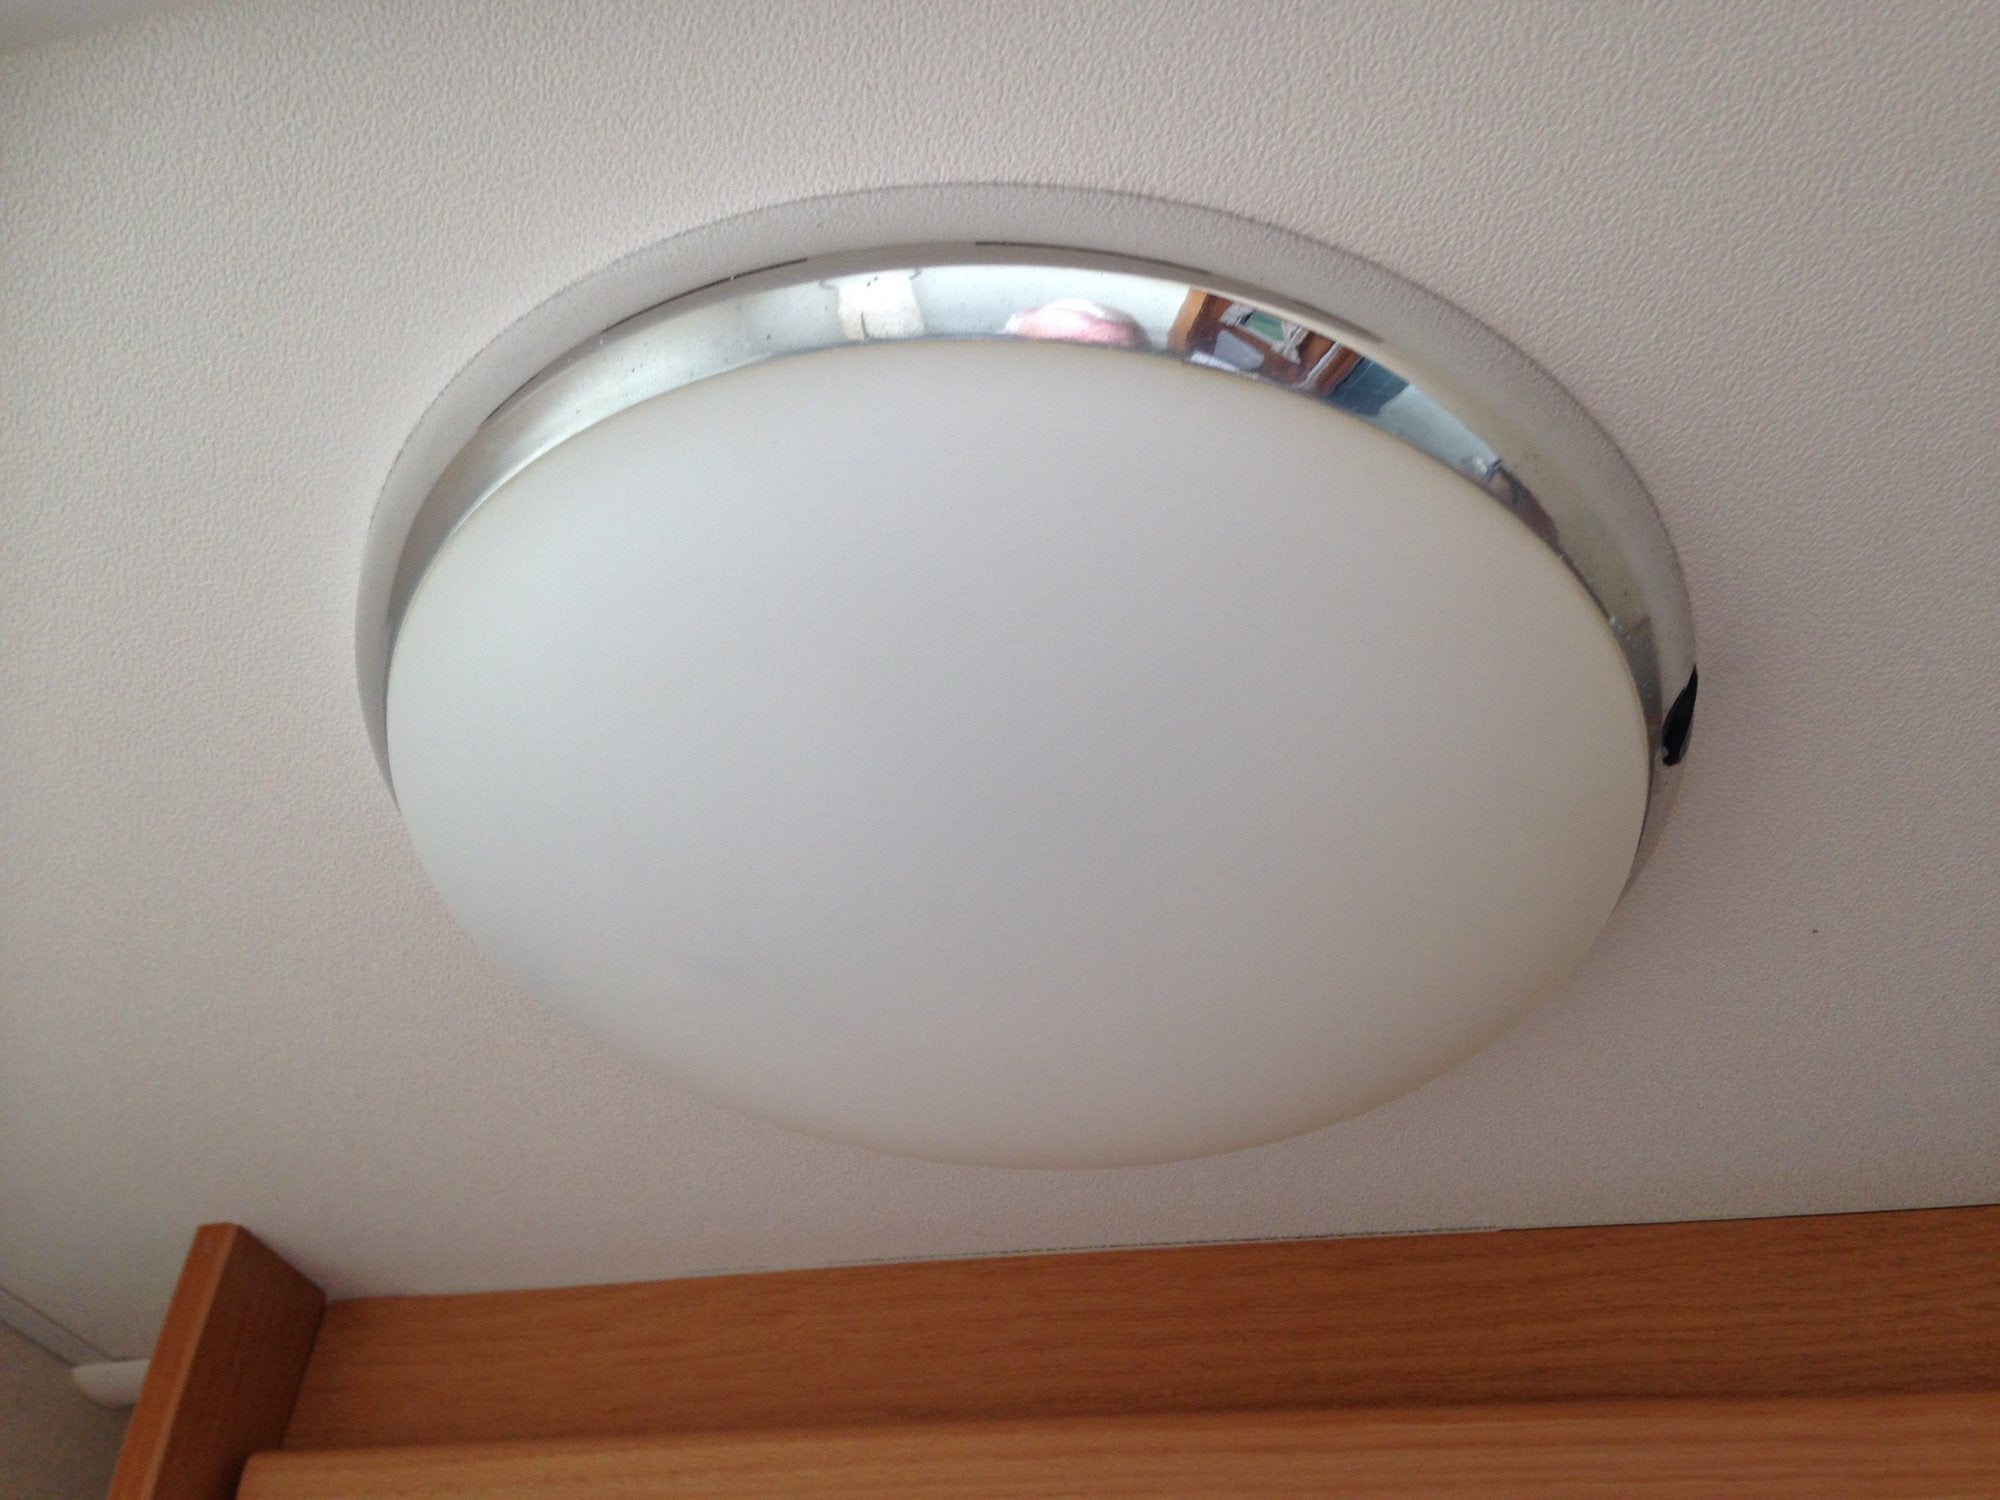 Dome Light Cover Removal Caravan, How To Remove Light Fixture Cover With Clips